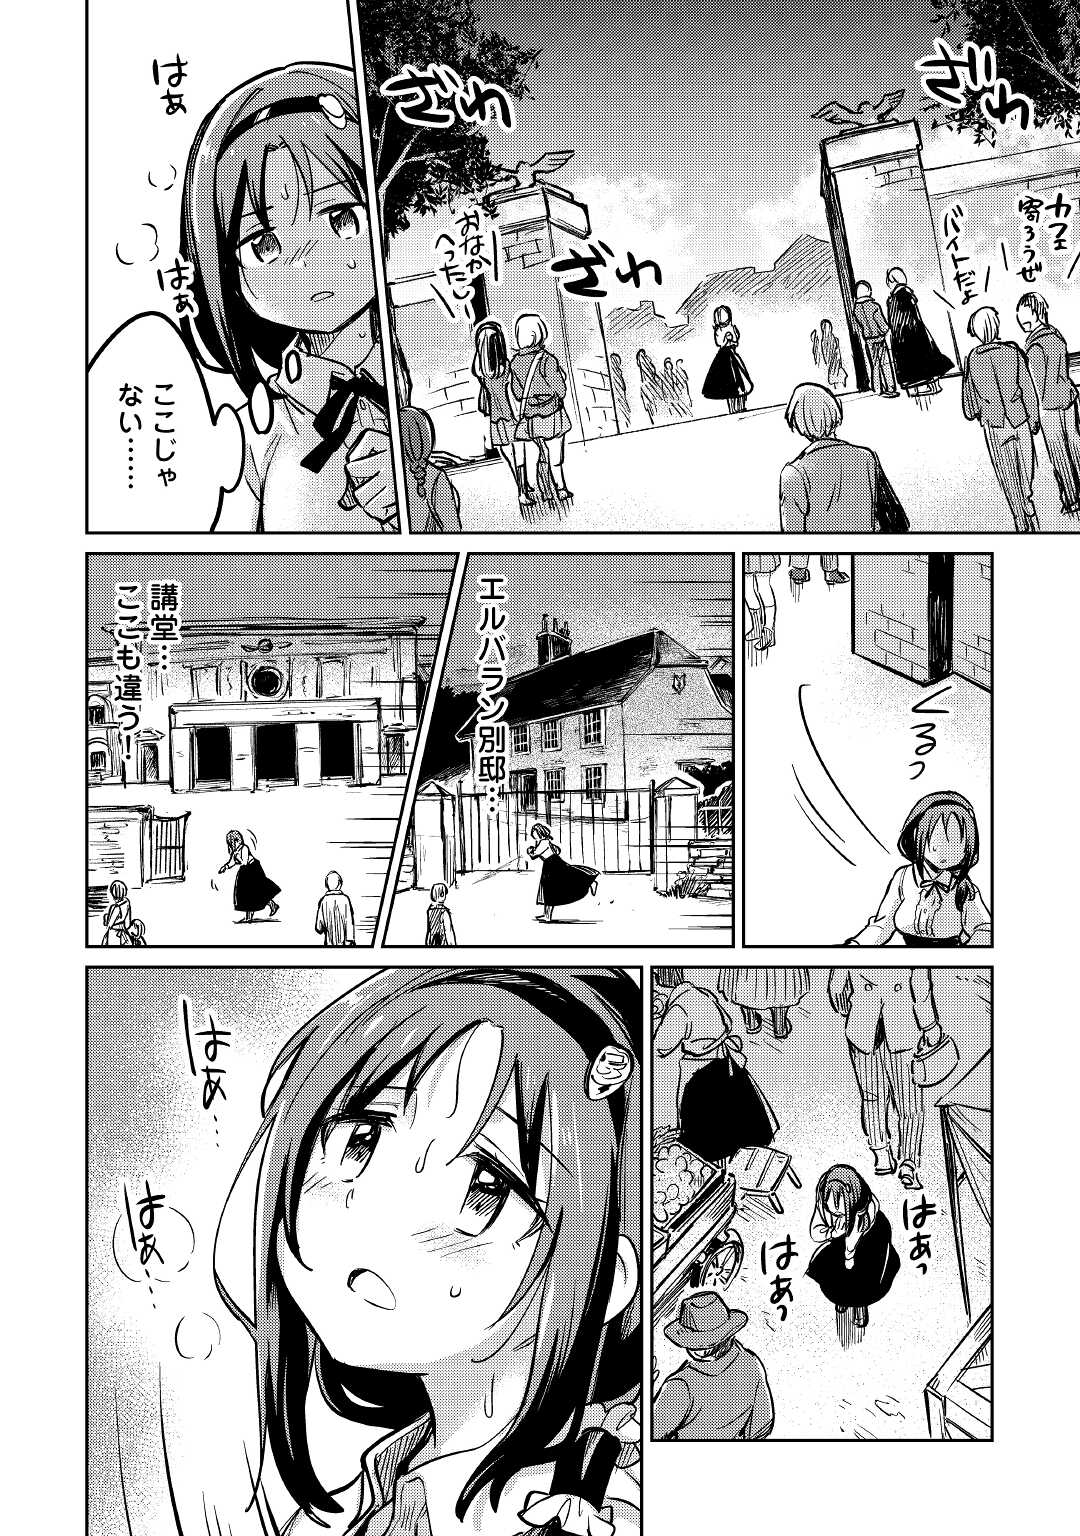 The Former Structural Researcher’s Story of Otherworldly Adventure 第41話 - Page 28